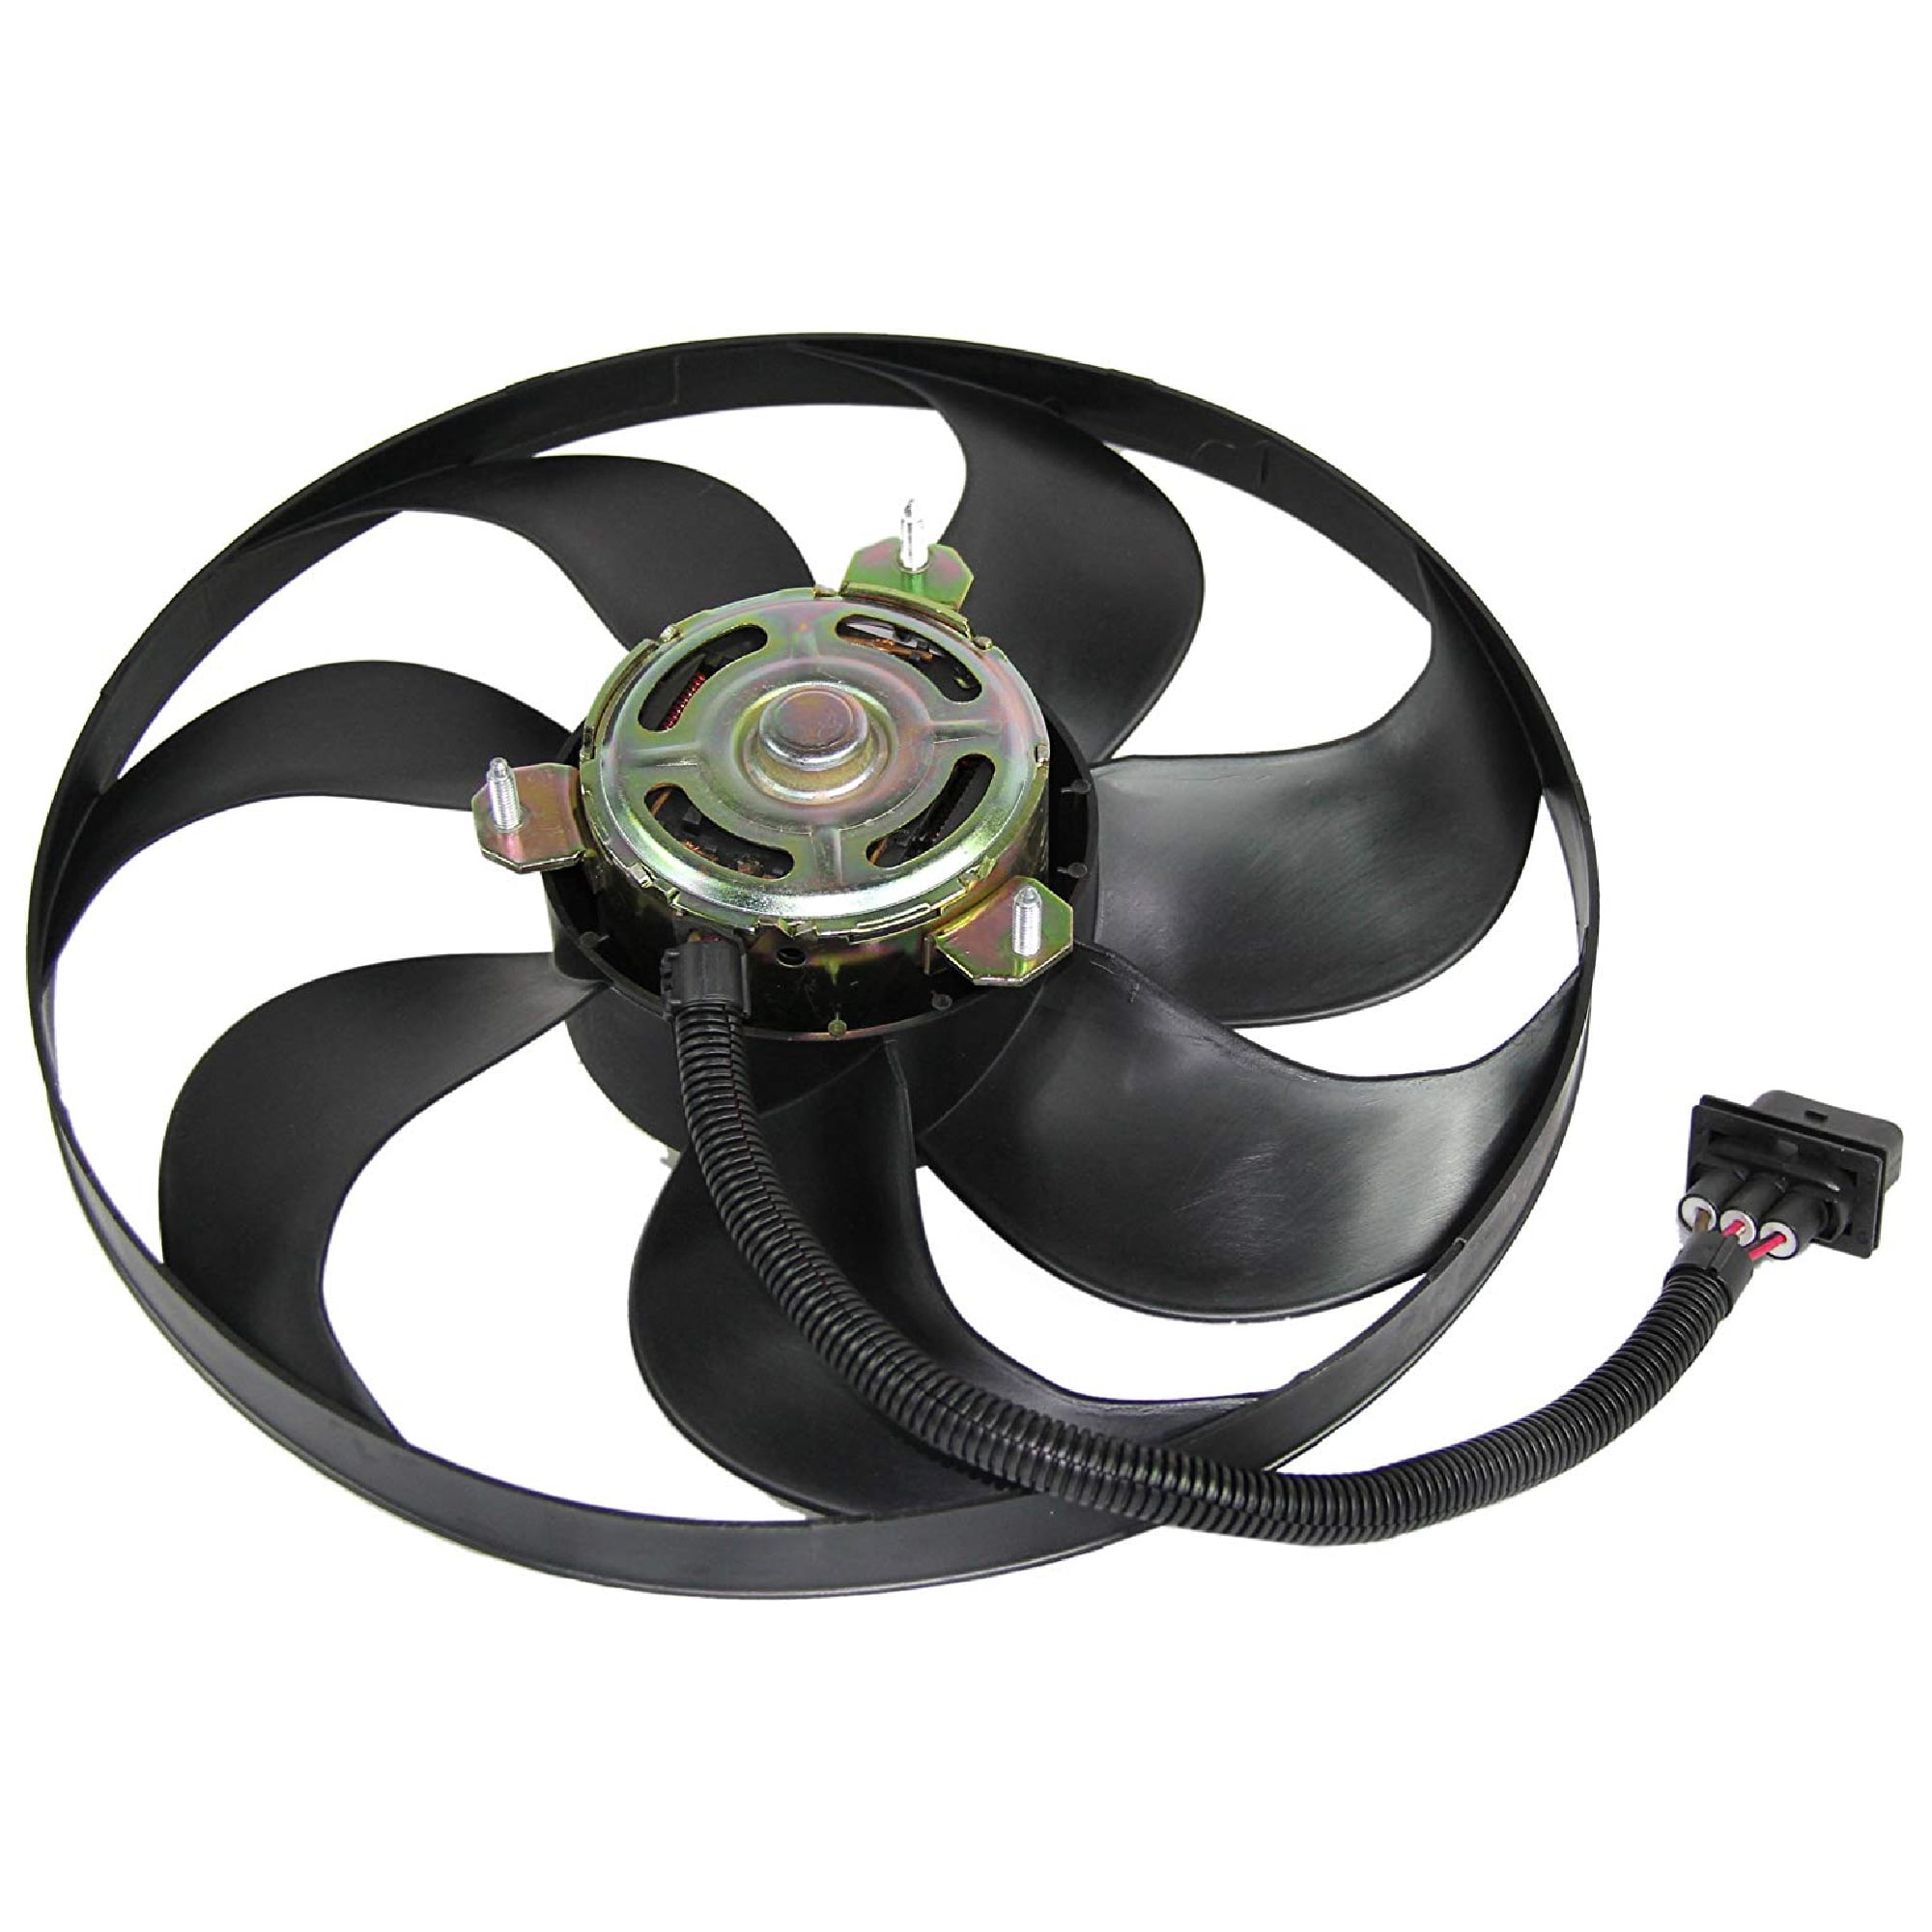 Replaces 6X0959455C 6X0 959 455 C BOXI Left Driver Side Radiator Cooling Fan for 1998 1999 2000 2001 2002 2003 2004 2005 2006 Volkswagen Beetle 